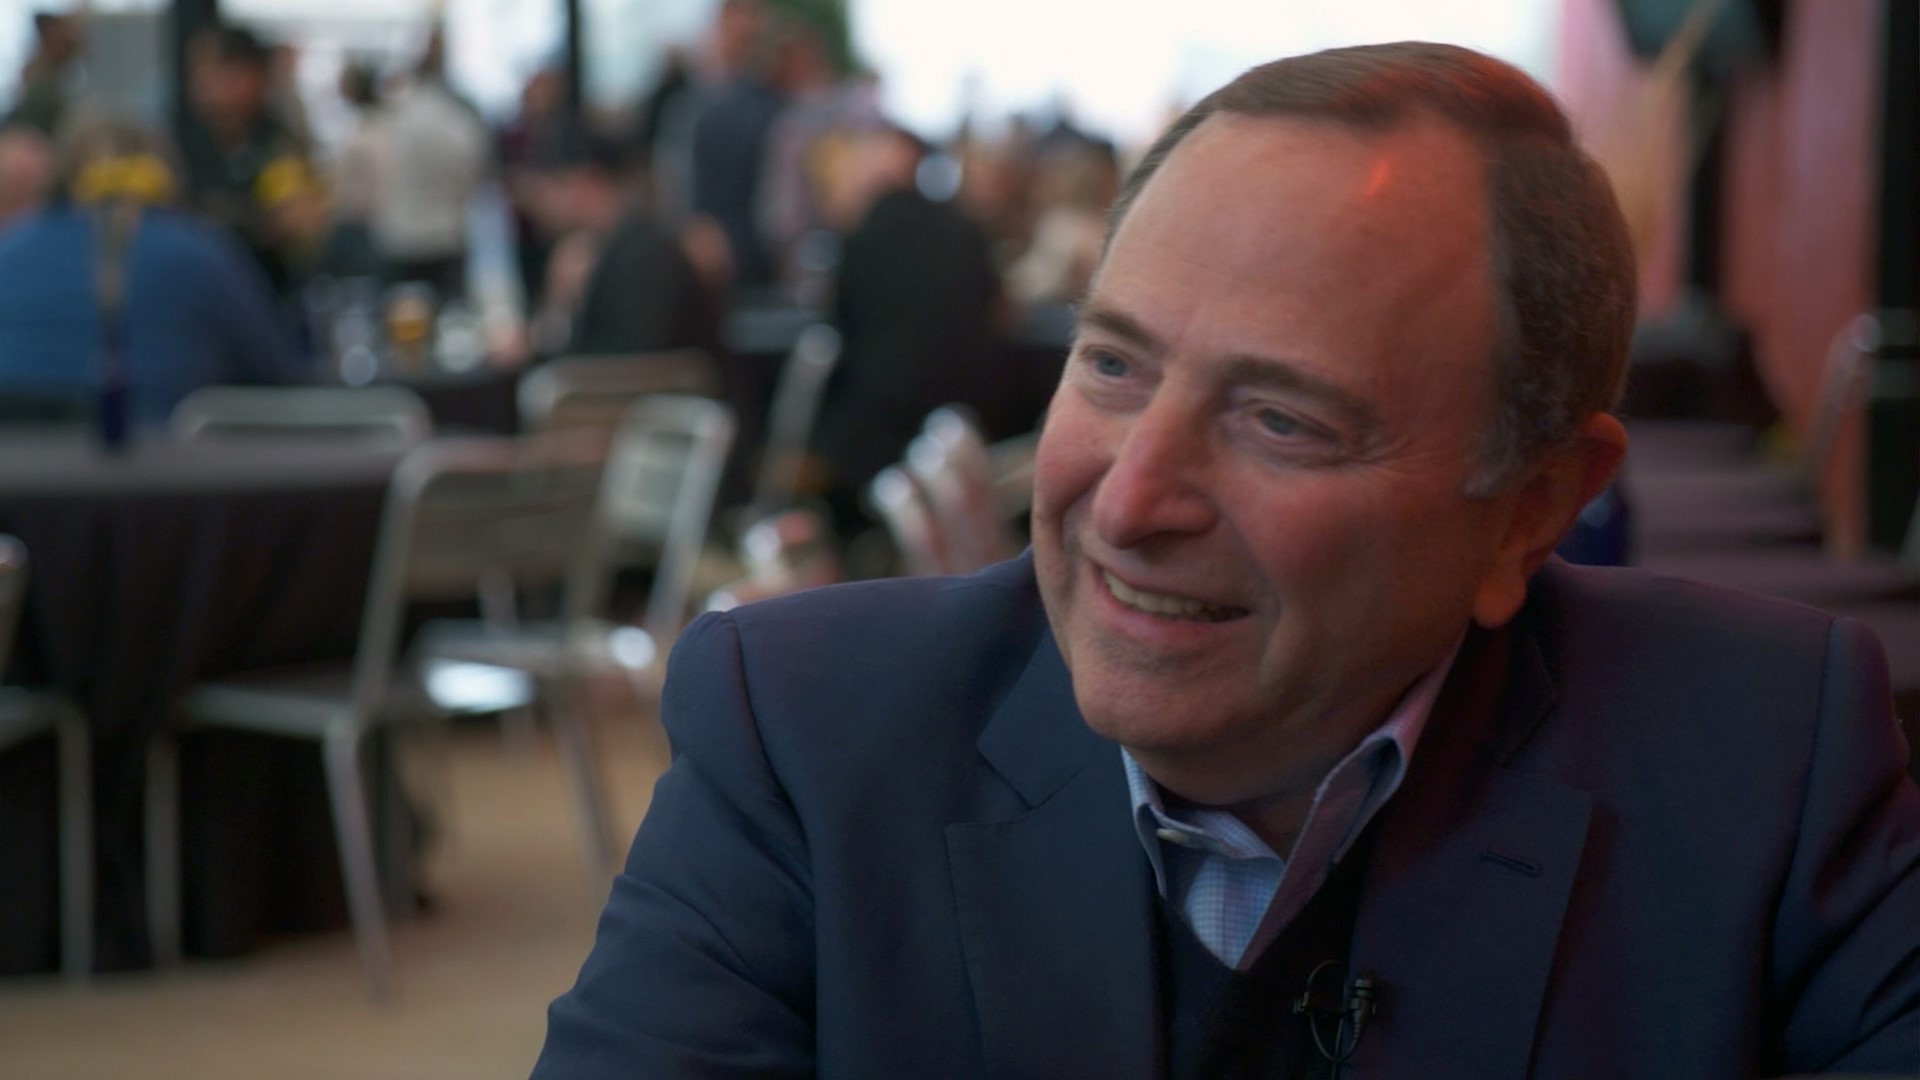 NHL Commissioner Gary Bettman shared a drink with KING 5's Chris Daniels about the future of pro hockey in Seattle, including Kraken rumors.